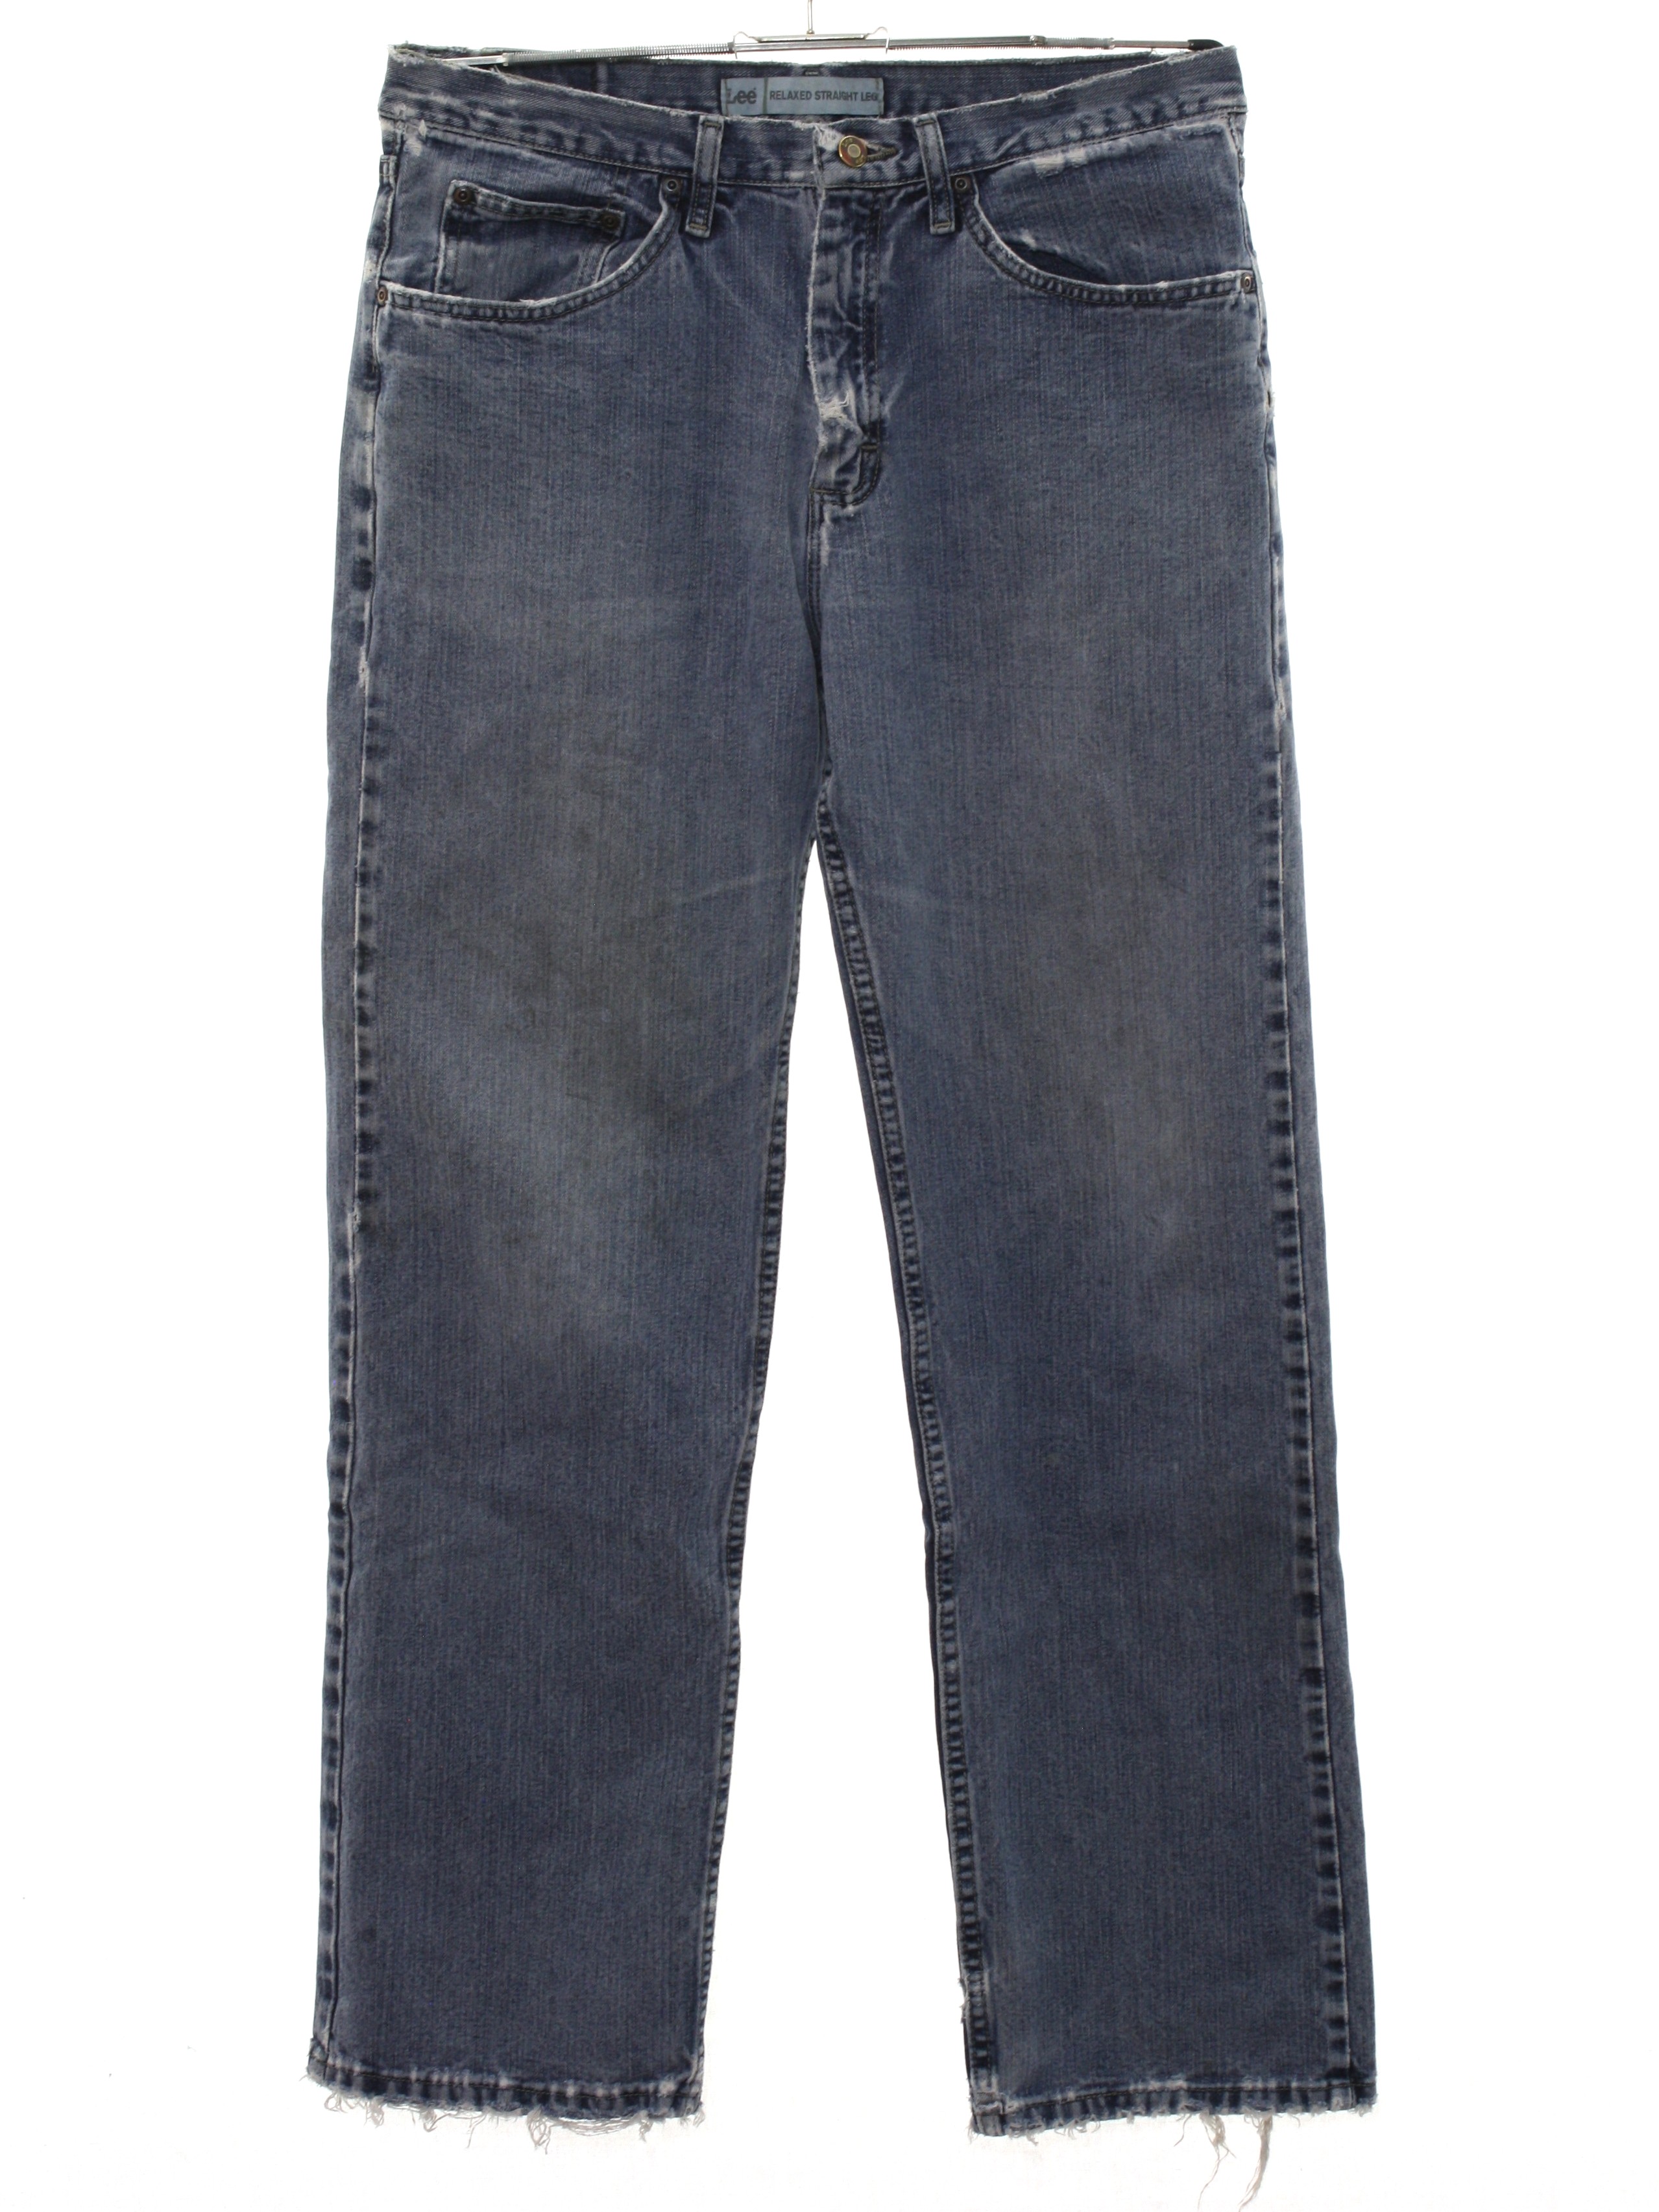 90s Pants (Lee): 90s -Lee- Mens stone washed slightly faded and worn ...